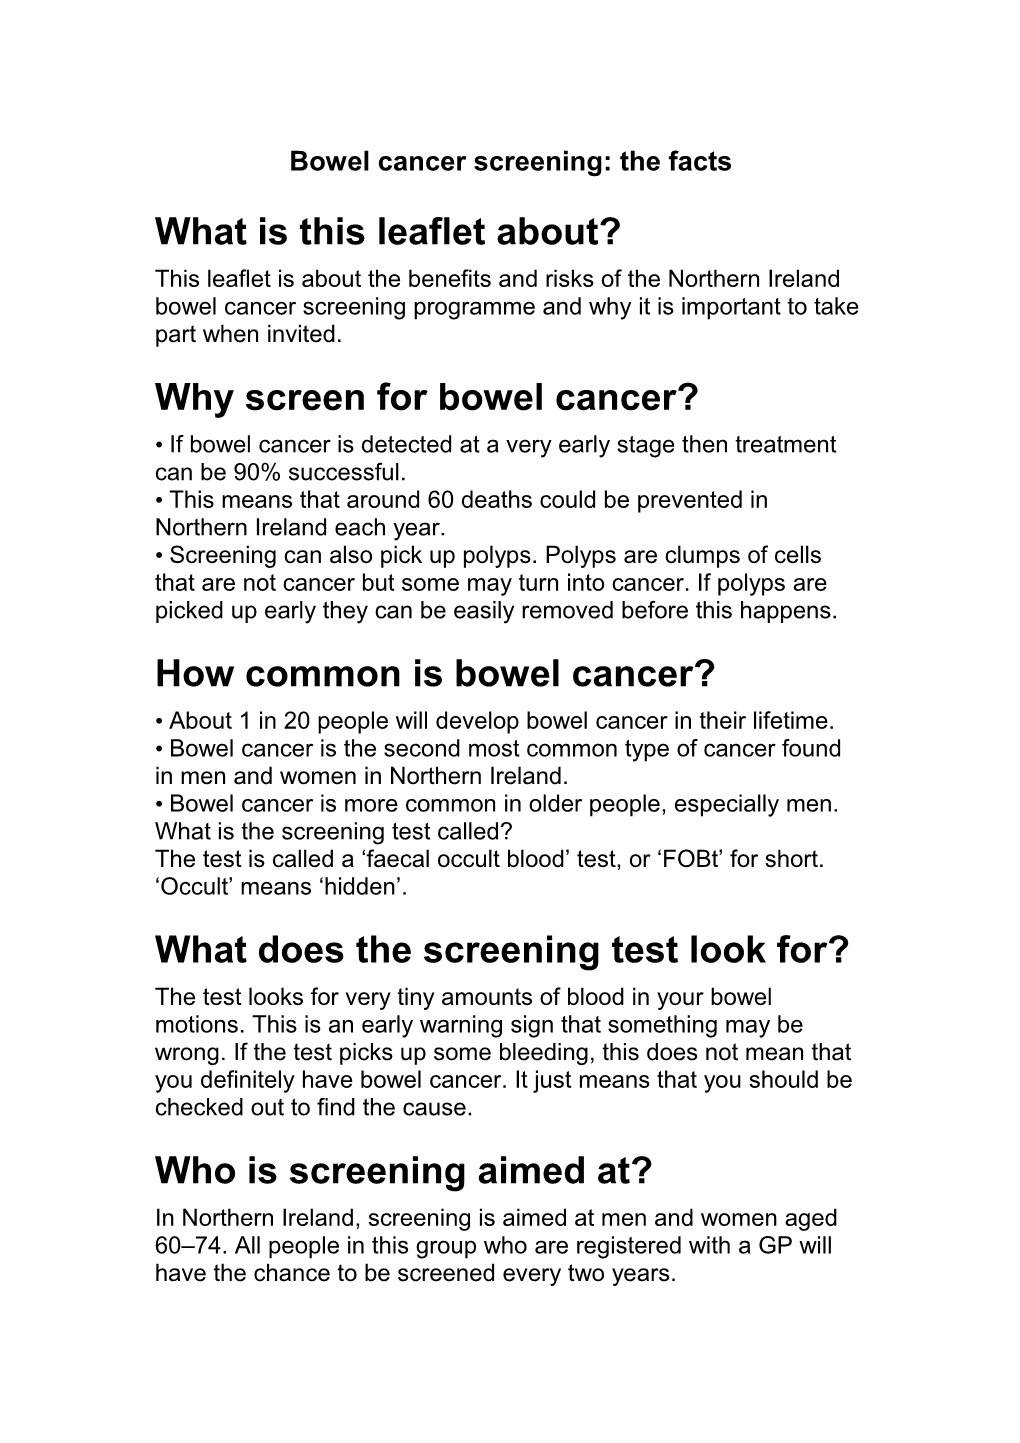 Bowel Cancer Screening:The Facts